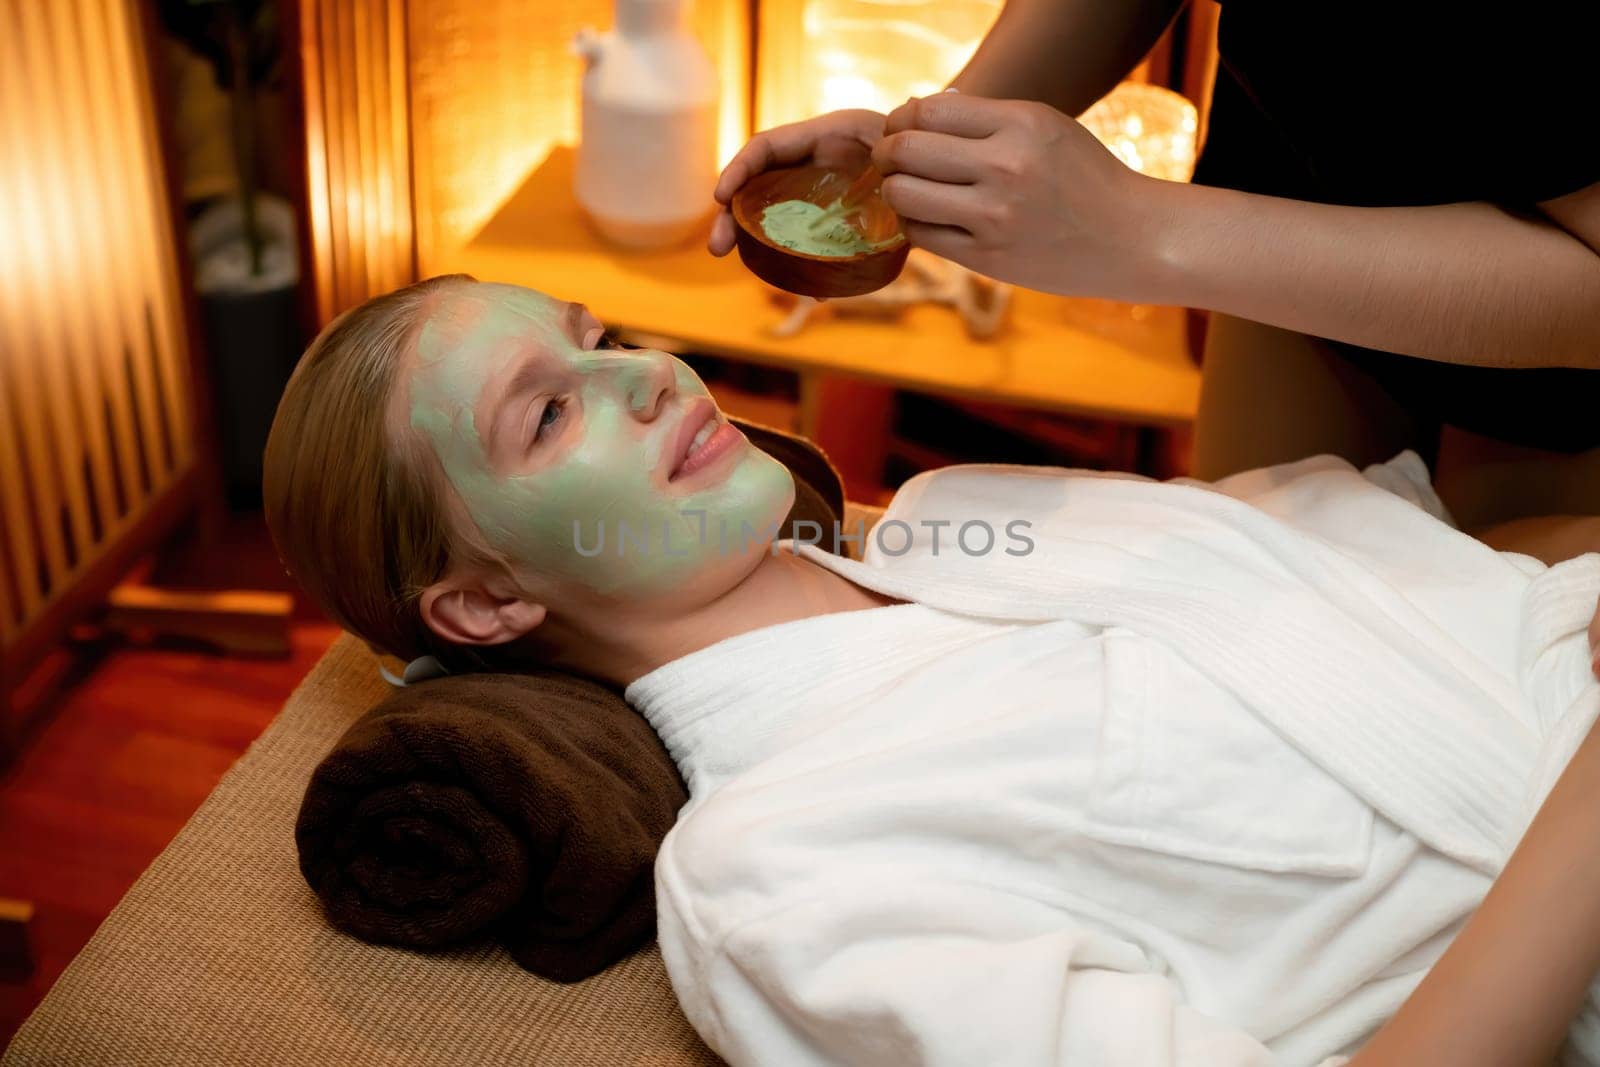 Serene ambiance of spa salon, woman customer indulges in rejuvenating with luxurious face cream massage with warm lighting candle. Facial skin treatment and beauty care concept. Quiescent